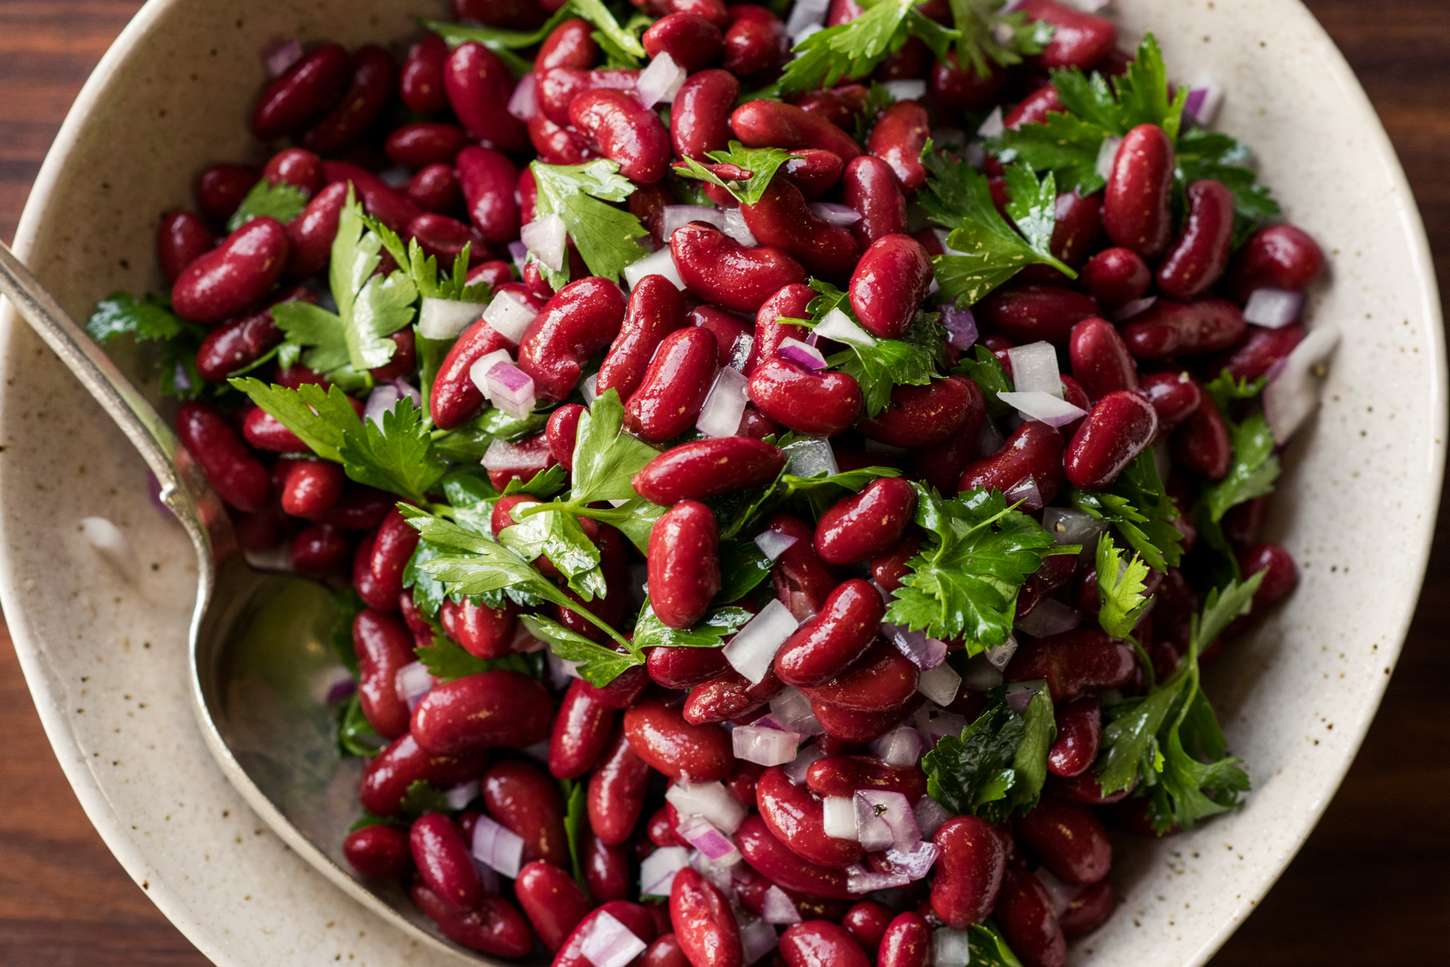 Kidney bean side dishes